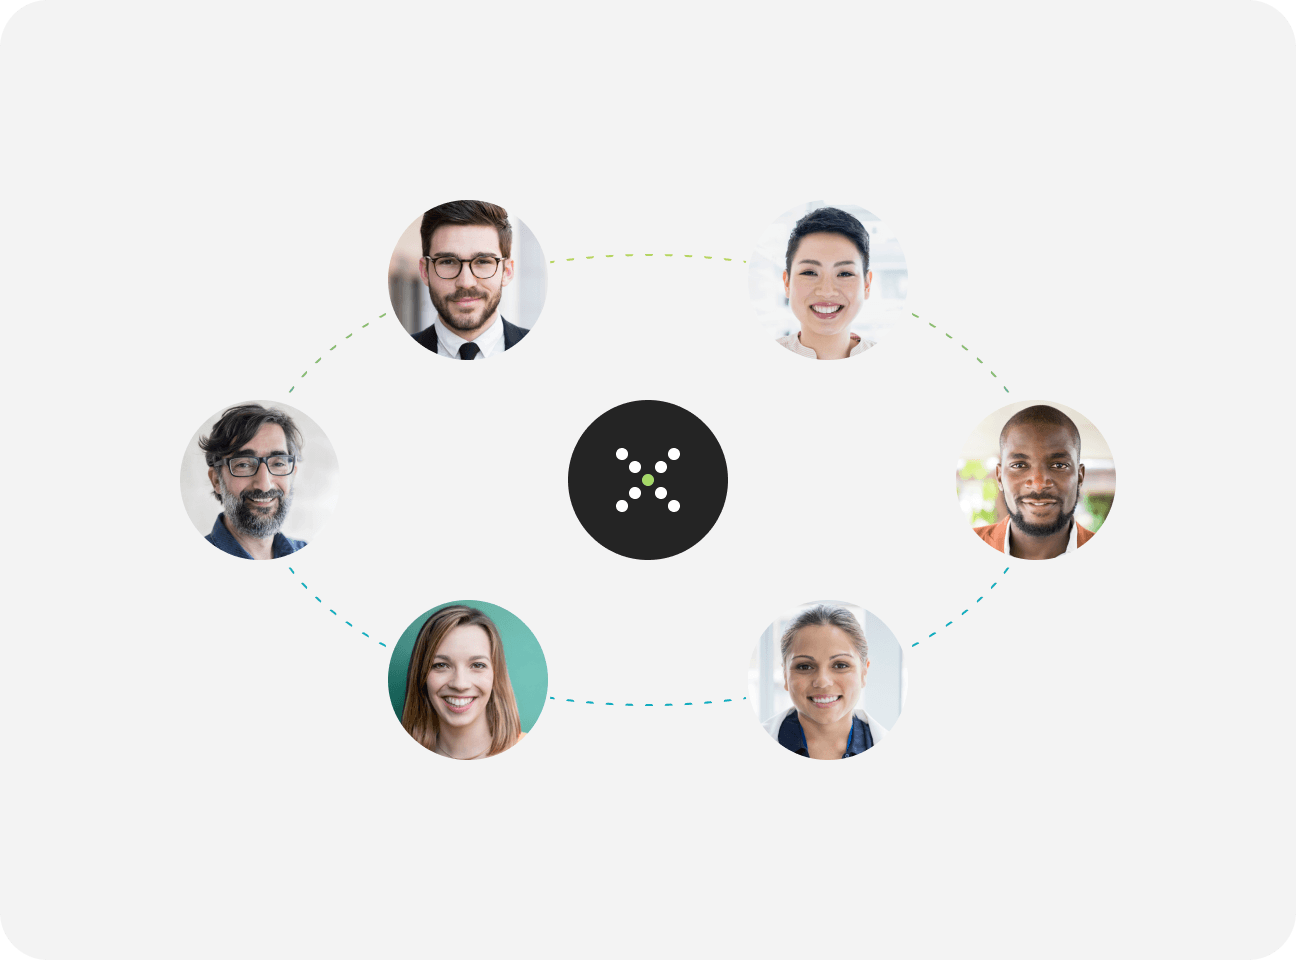 Connect and collaborate with your peers and experts